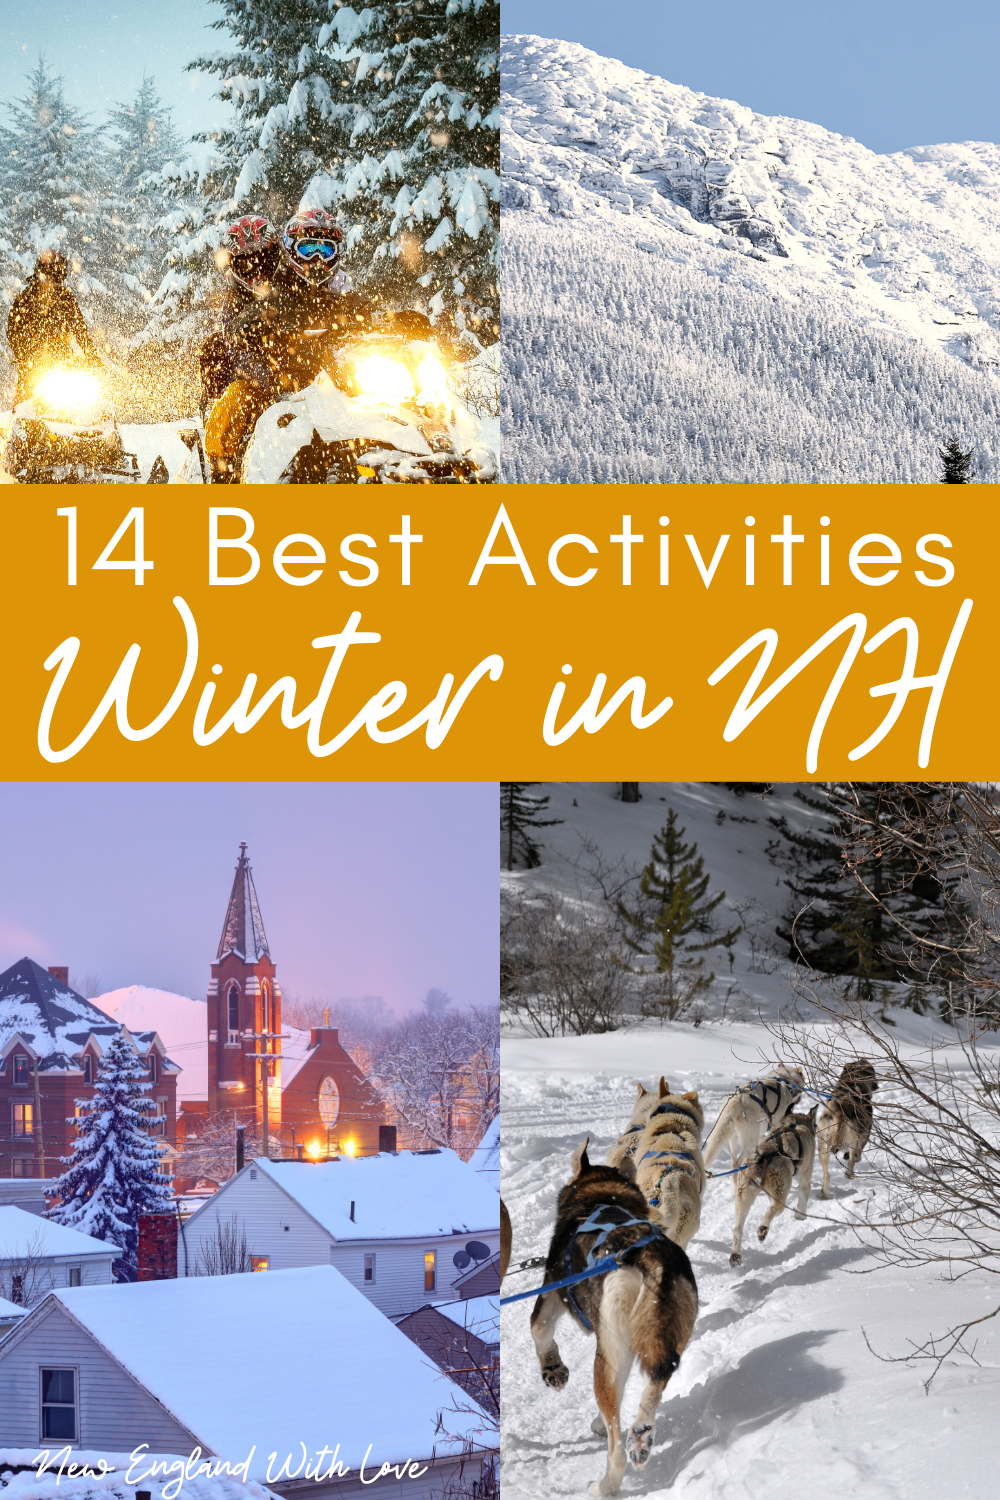 Social image for Pinterest that says "24 Best Activities: Winter in NH."